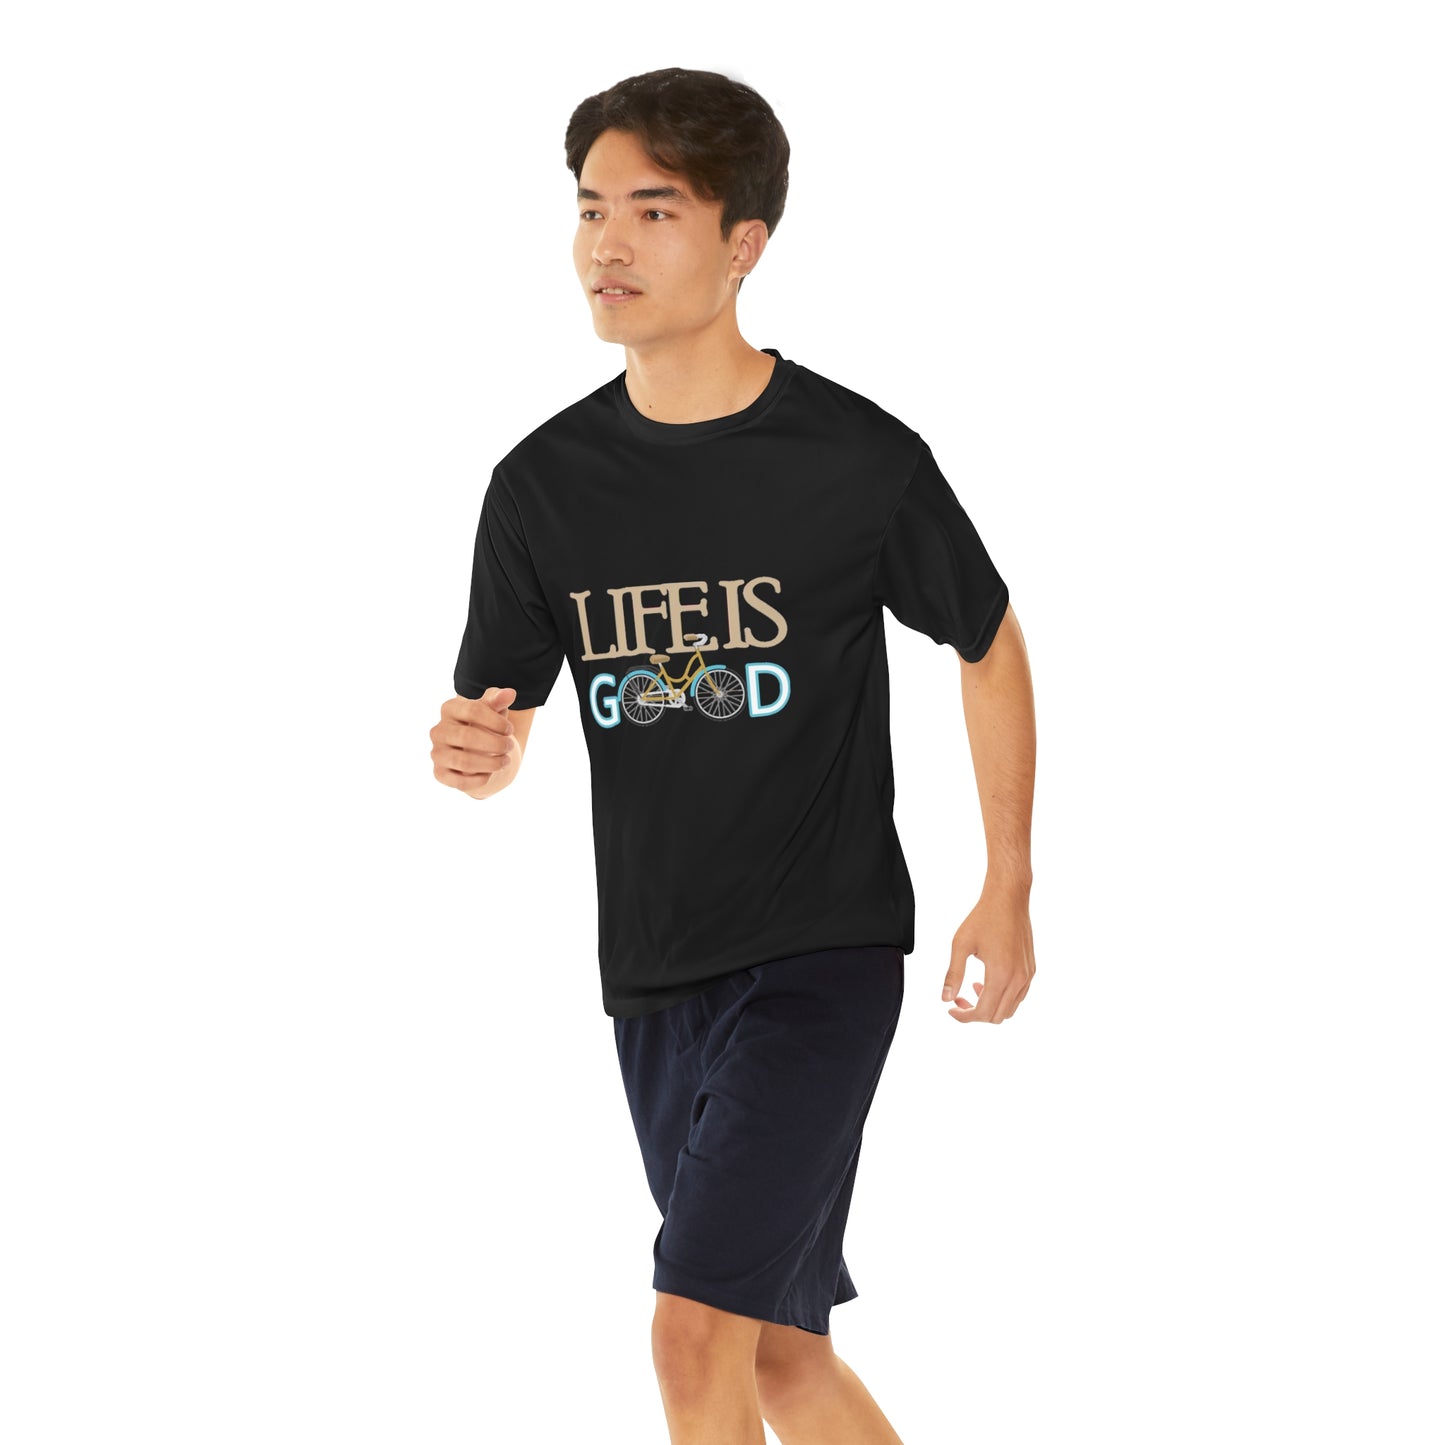 Life is Good Men's Performance T-Shirt Moisture Wicking, Anti-Microbial